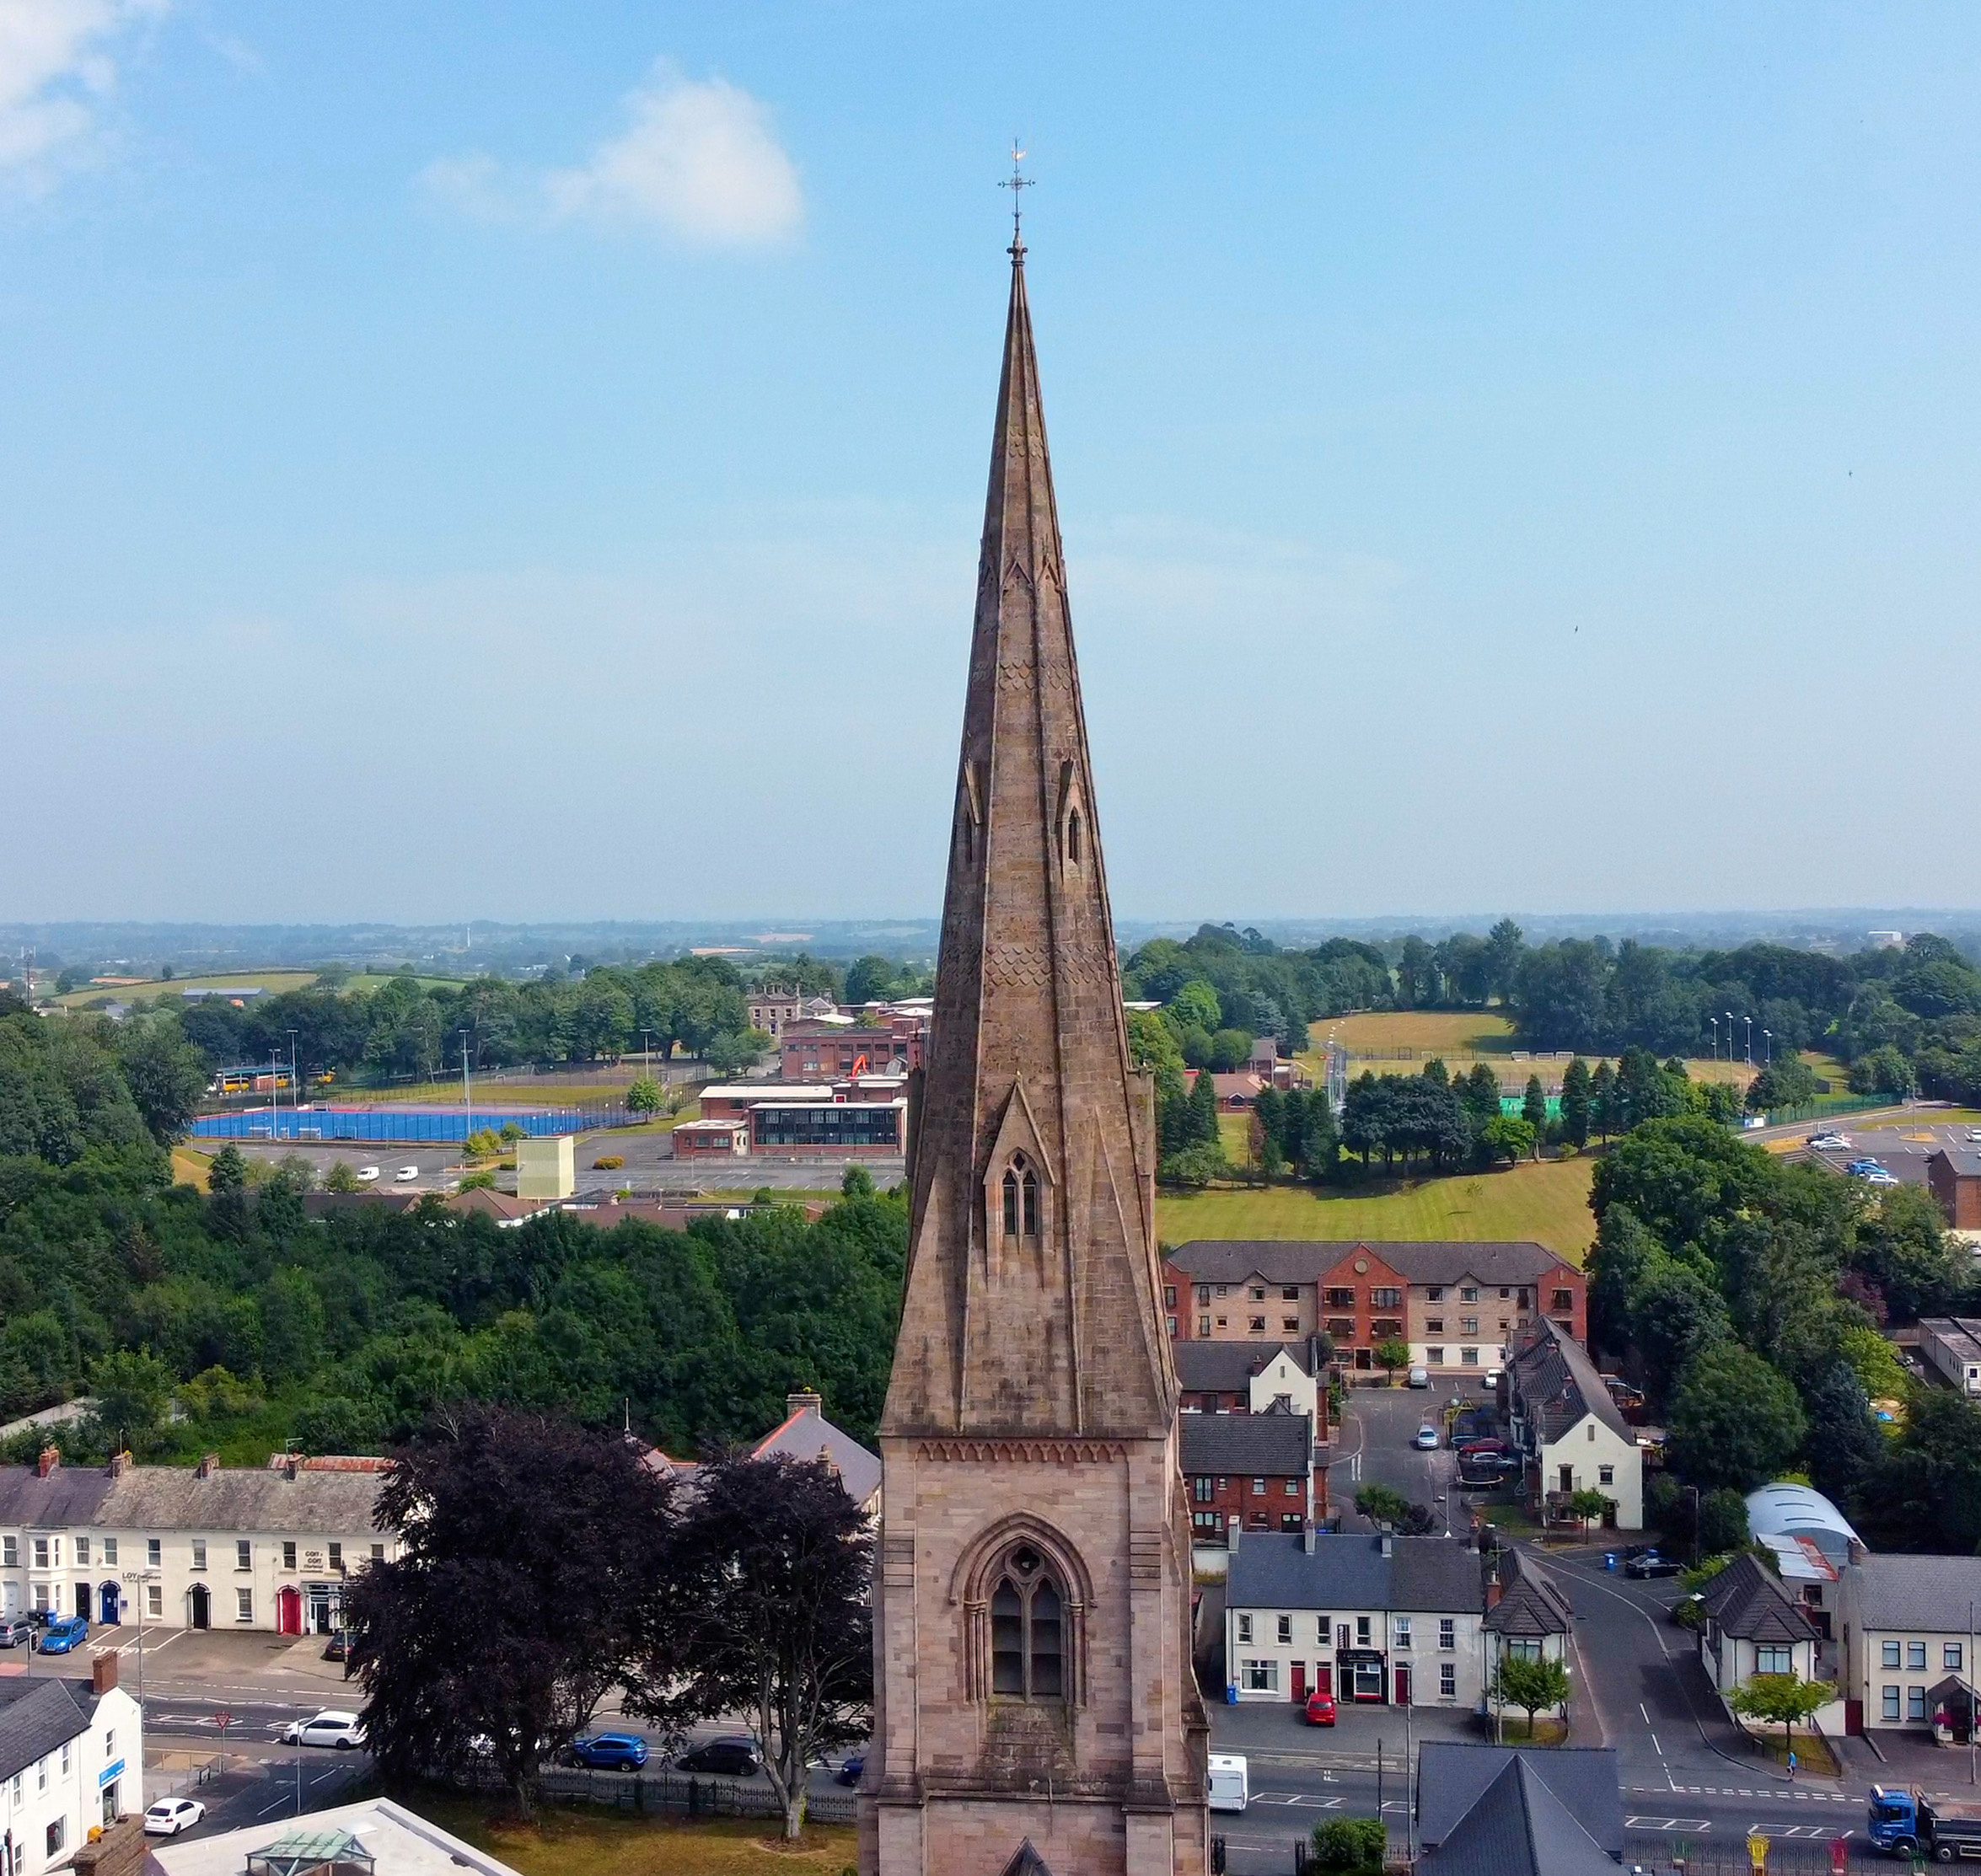 Aerial Photo of Holy Trinity Church Cookstown County Tyrone Northern Ireland